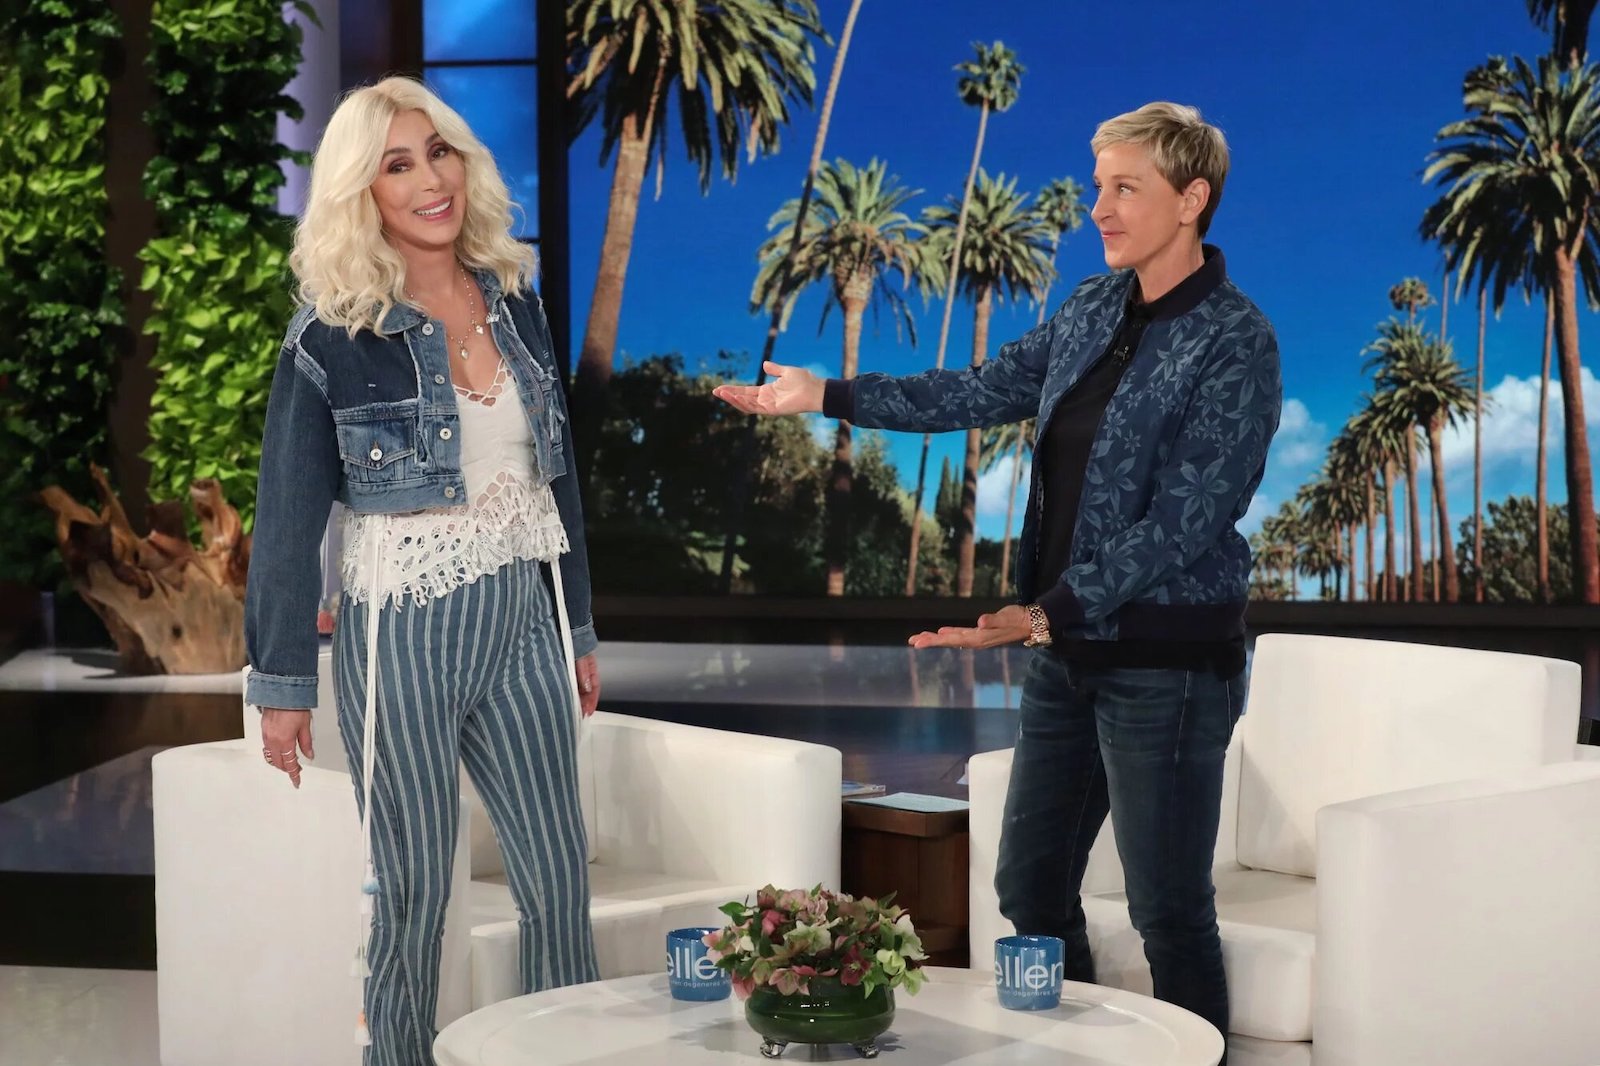 Guests who thought Ellen DeGeneres was mean and clapped back – Film Daily